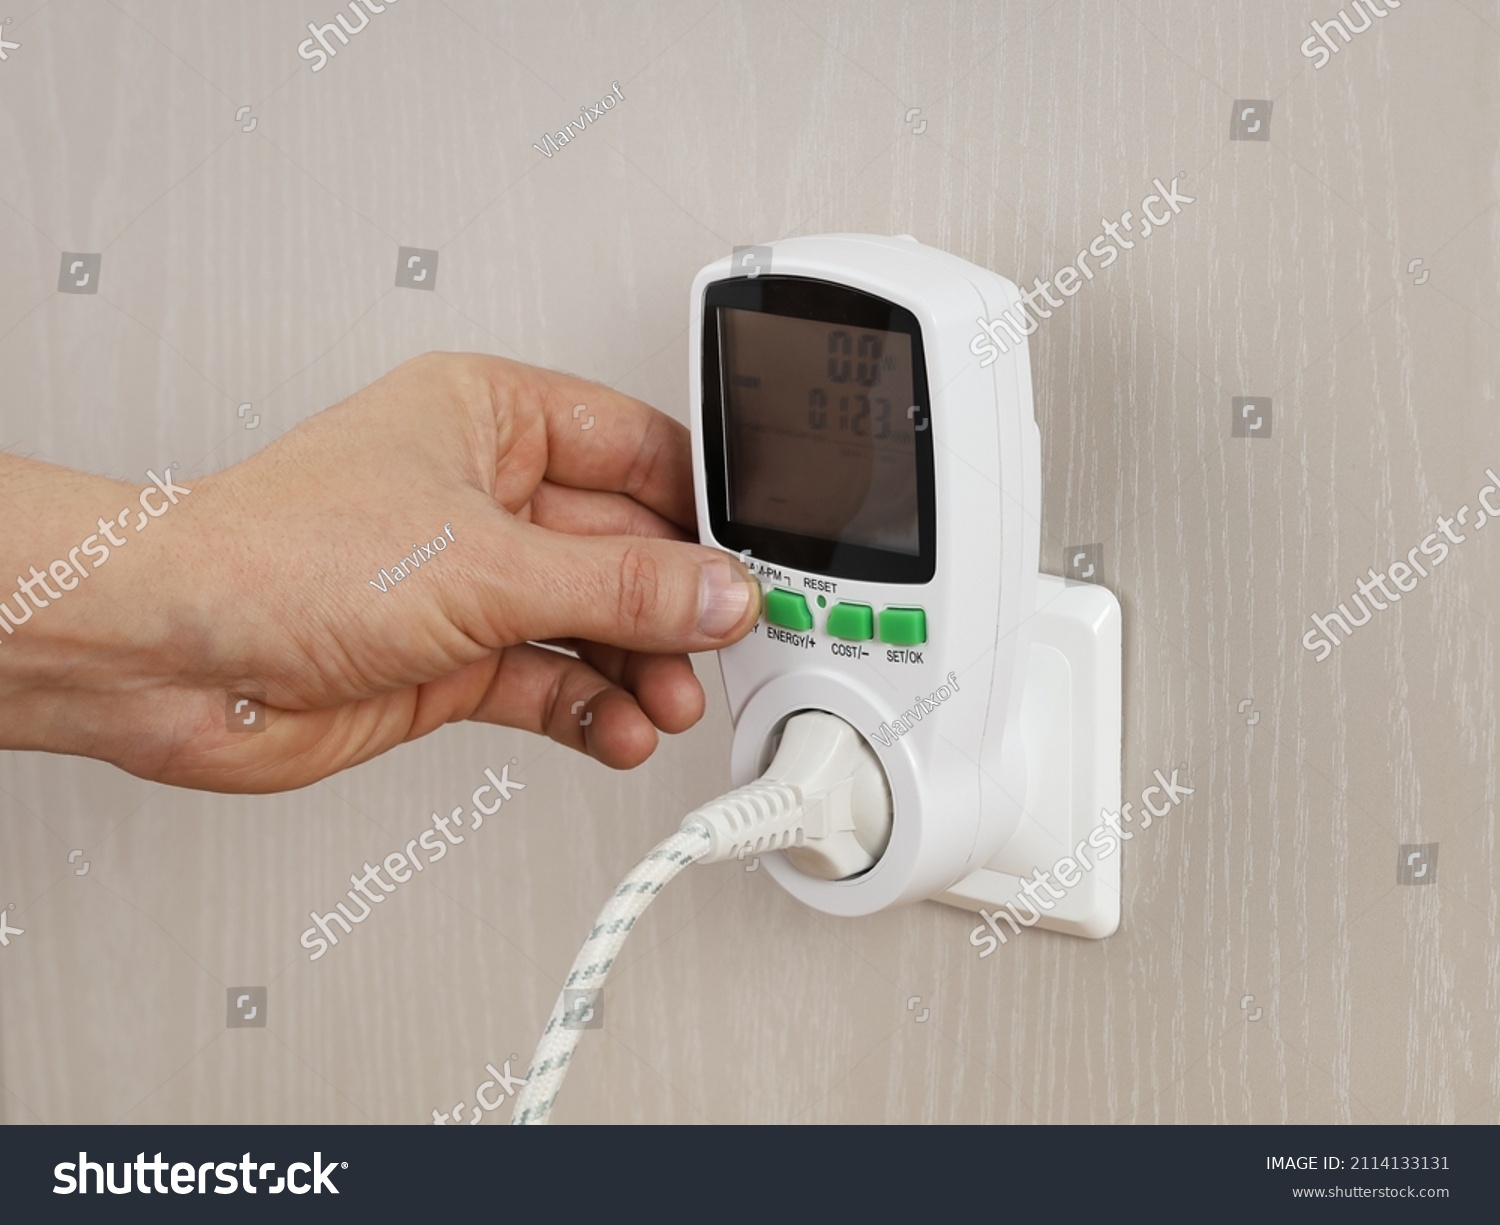 Hand presses button in wattmeter on wall, for measuring electricity costs in device, close-up #2114133131